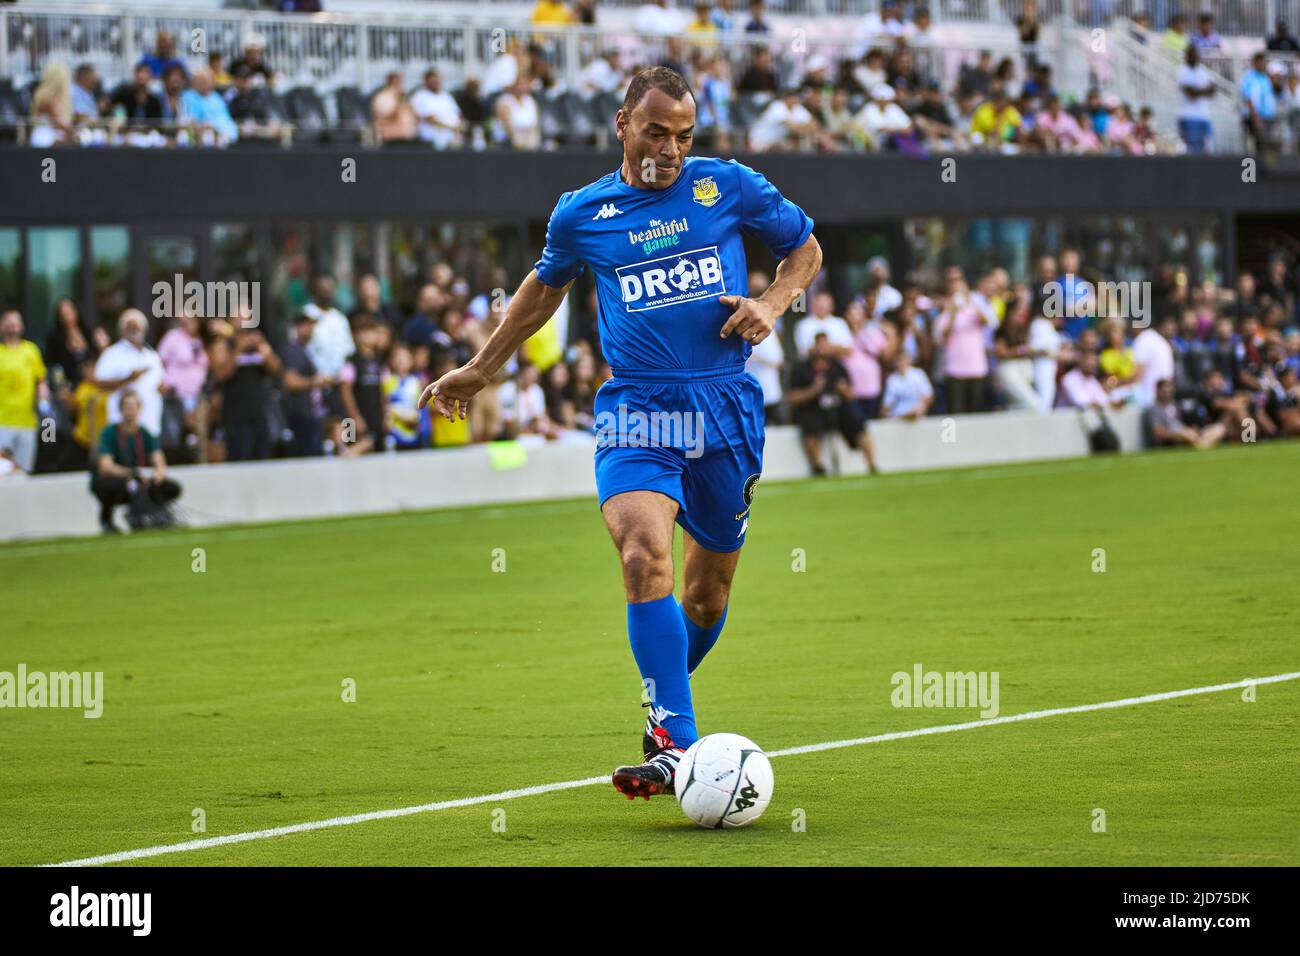 Fort Lauderdale, FL, USA. 18th June 2022. 2C - Cafu - Former AC Milan and Brazilian national team player during soccer match The Beautiful Game by R10 and RC3 owned global soccer football icons and Brazilian duo Ronaldinho and Roberto Carlos at DRV Pink Stadium in Florida, USA. Credit: Yaroslav Sabitov/YES Market Media/Alamy Live News. Stock Photo